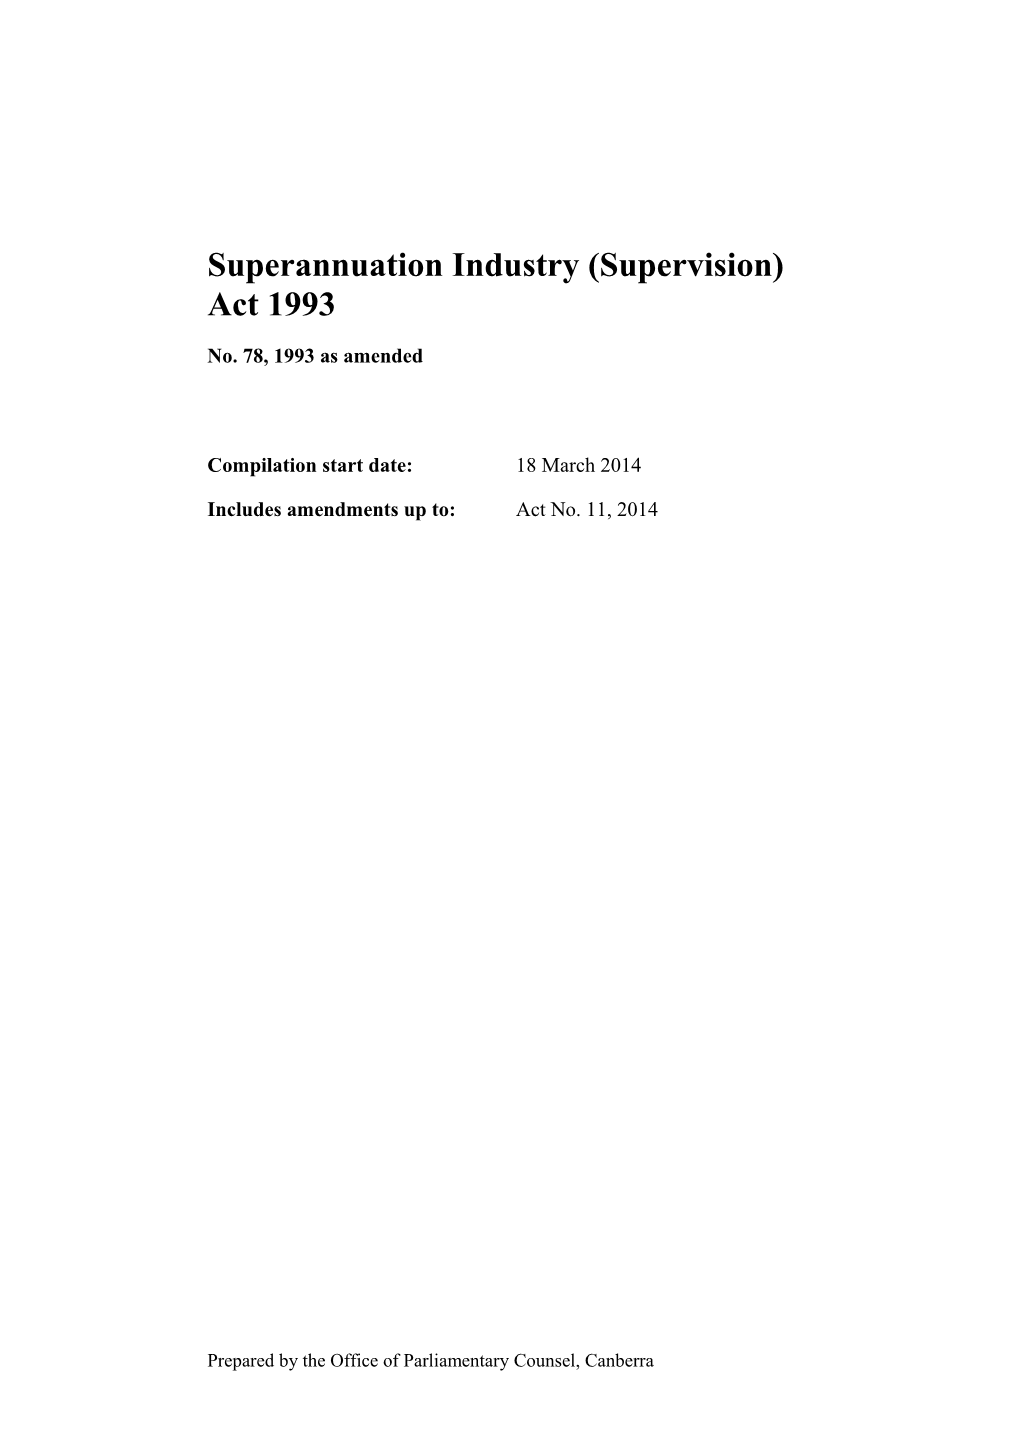 Superannuation Industry (Supervision) Act 1993